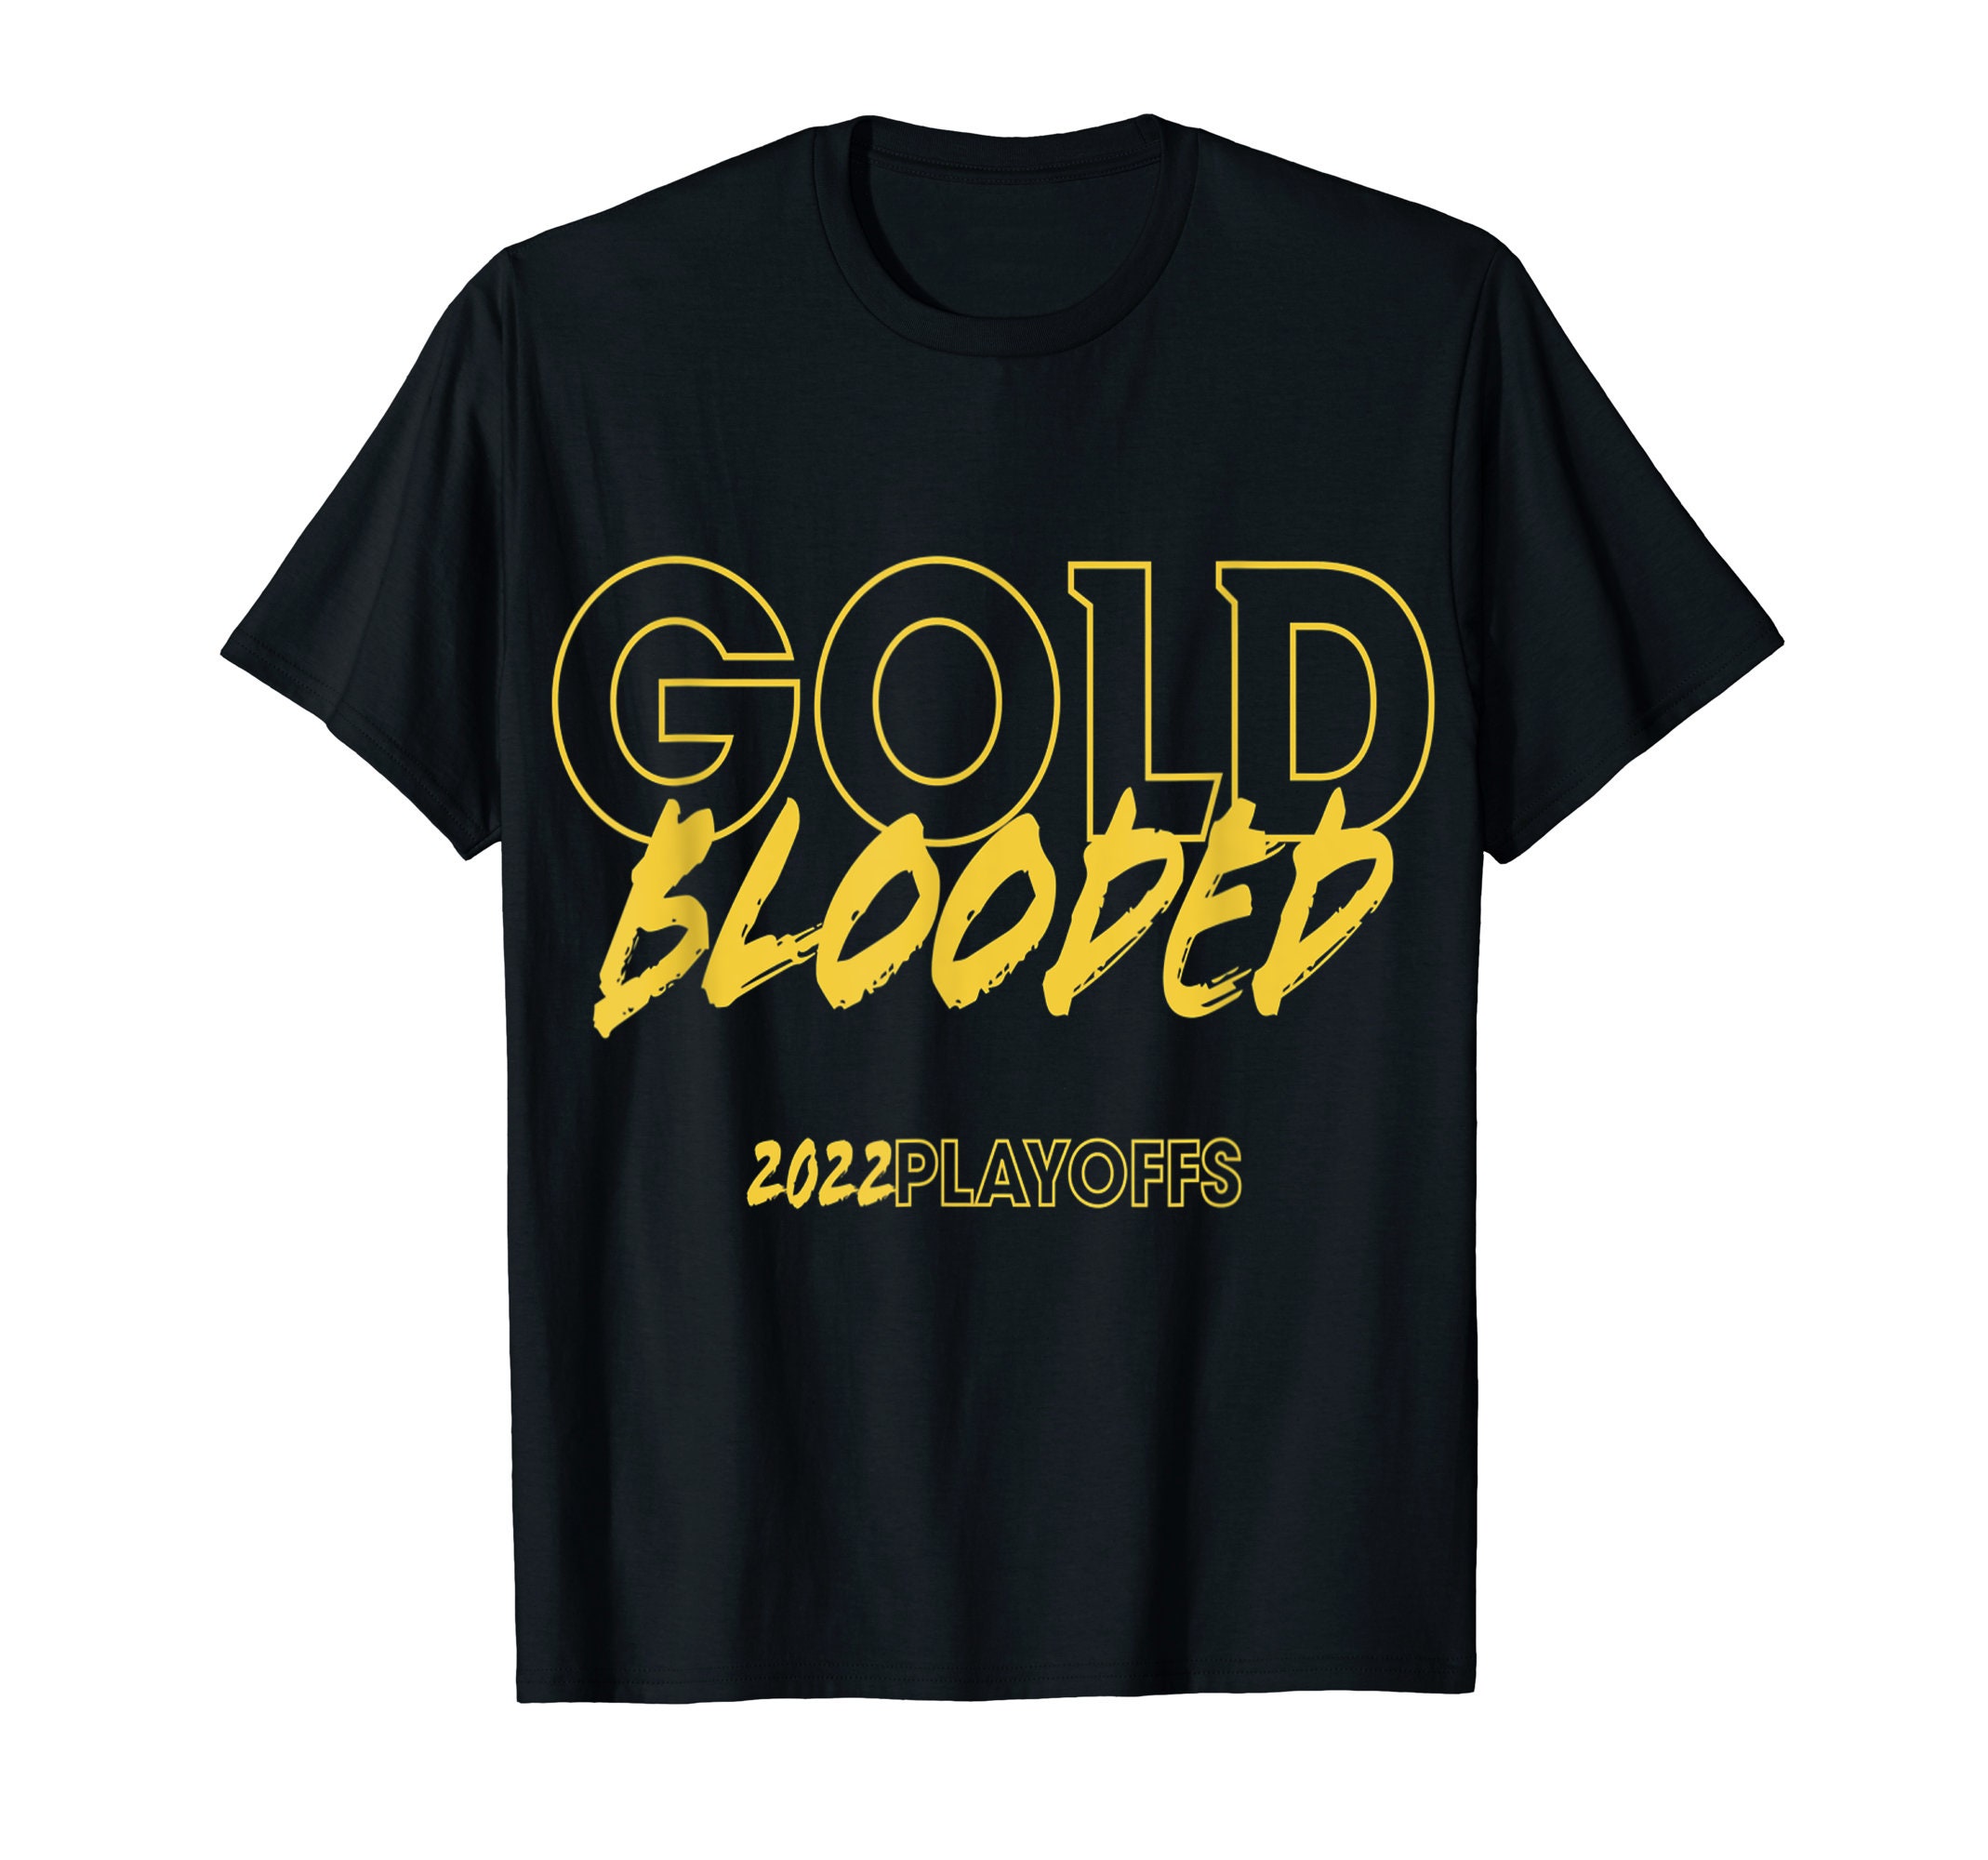 Gold Blooded 2022 NBA Playoffs Gold Blooded Mantra Shirt